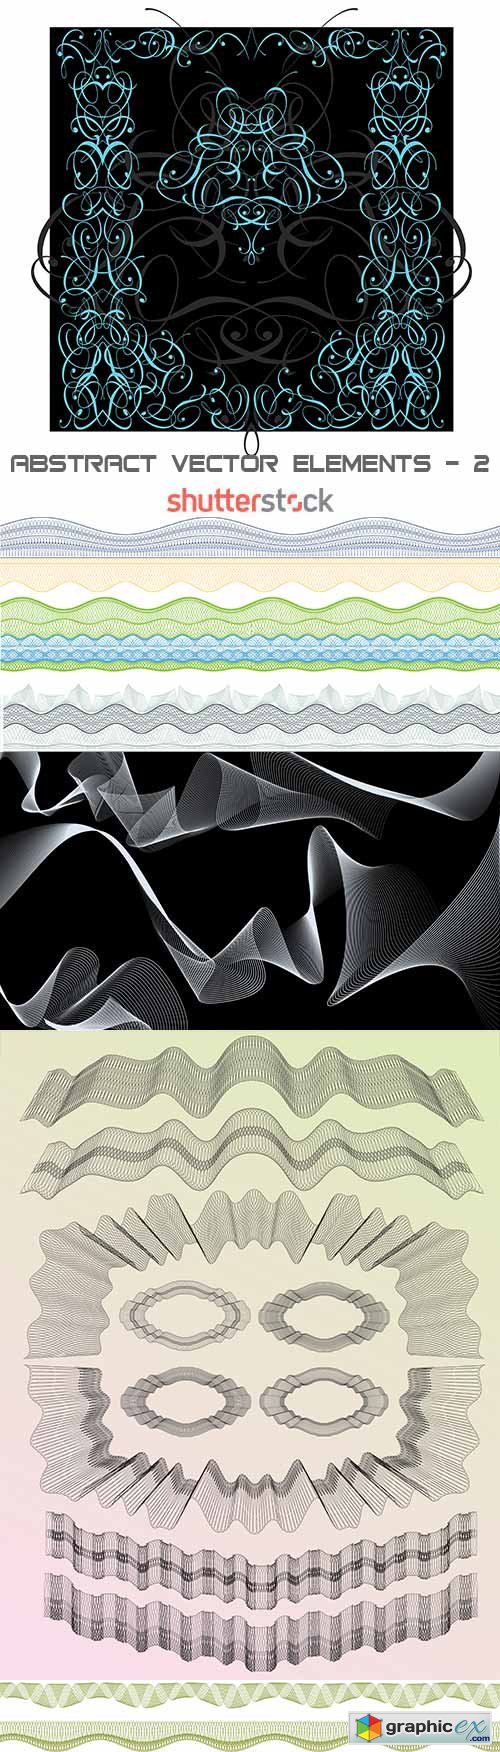 Abstract vector elements - 2